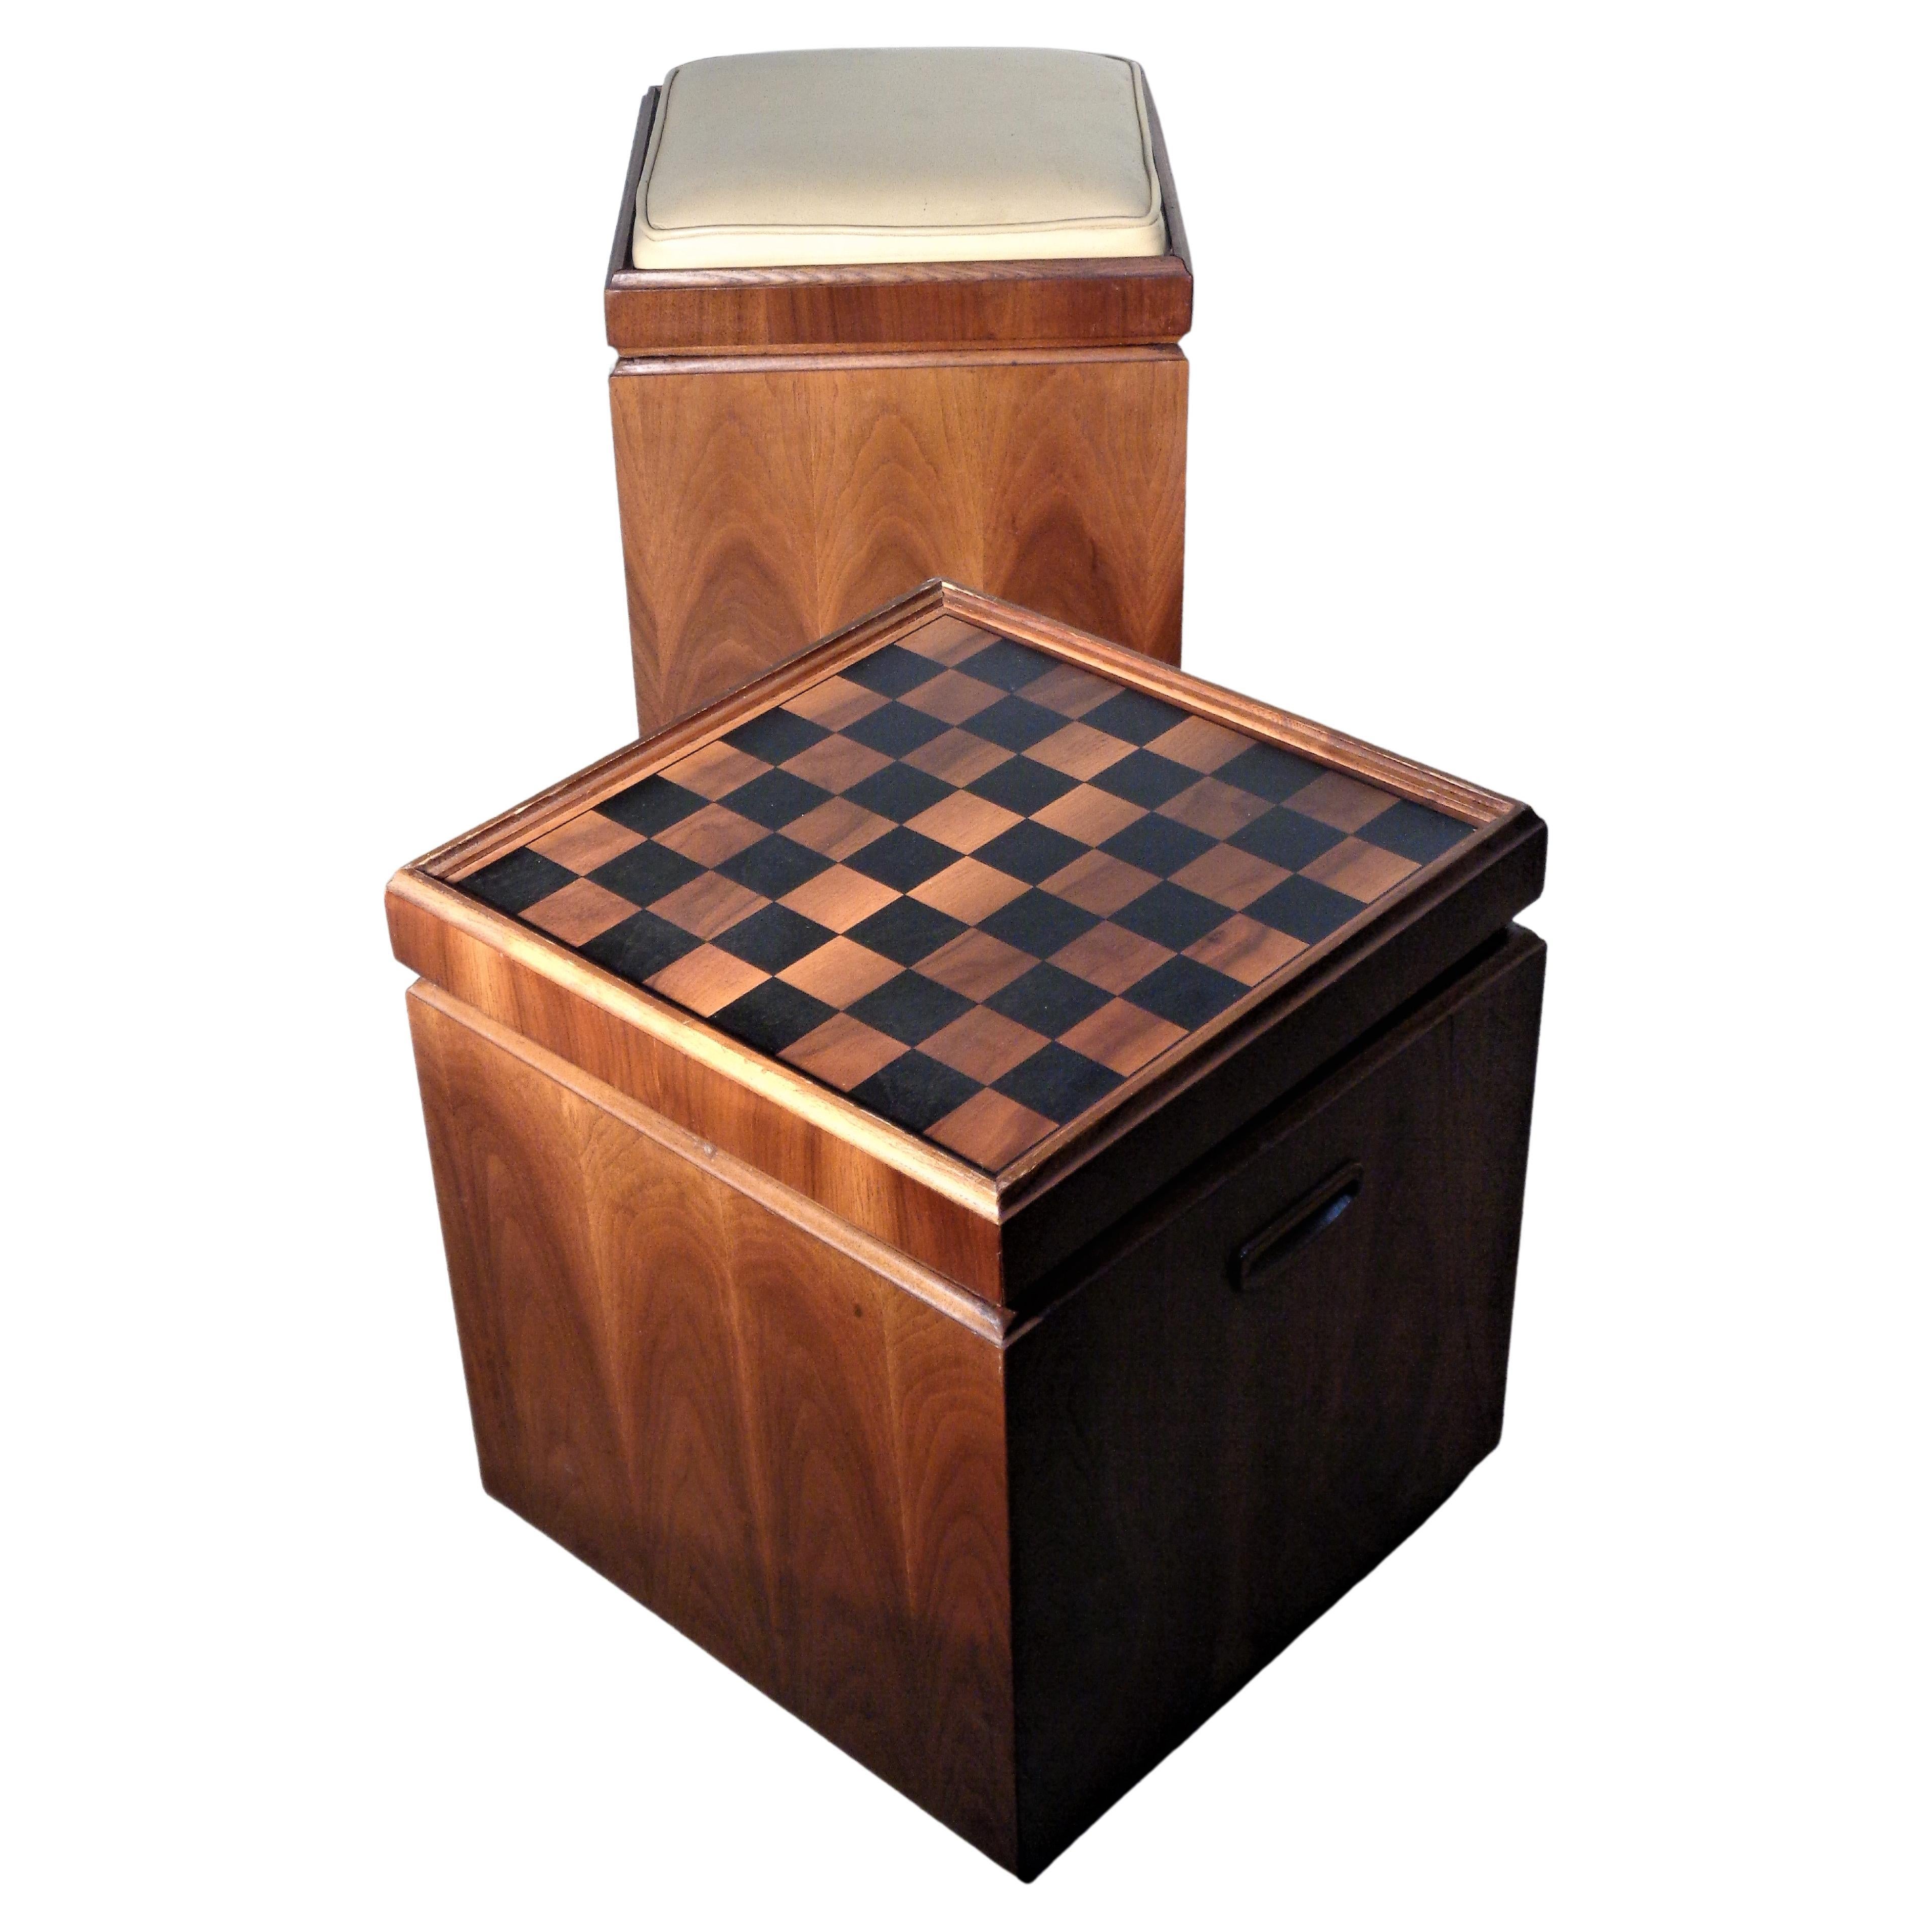 Stained Walnut Cube Ottomans Flip Top Upholstery Seat to Game Board by Lane, 1960